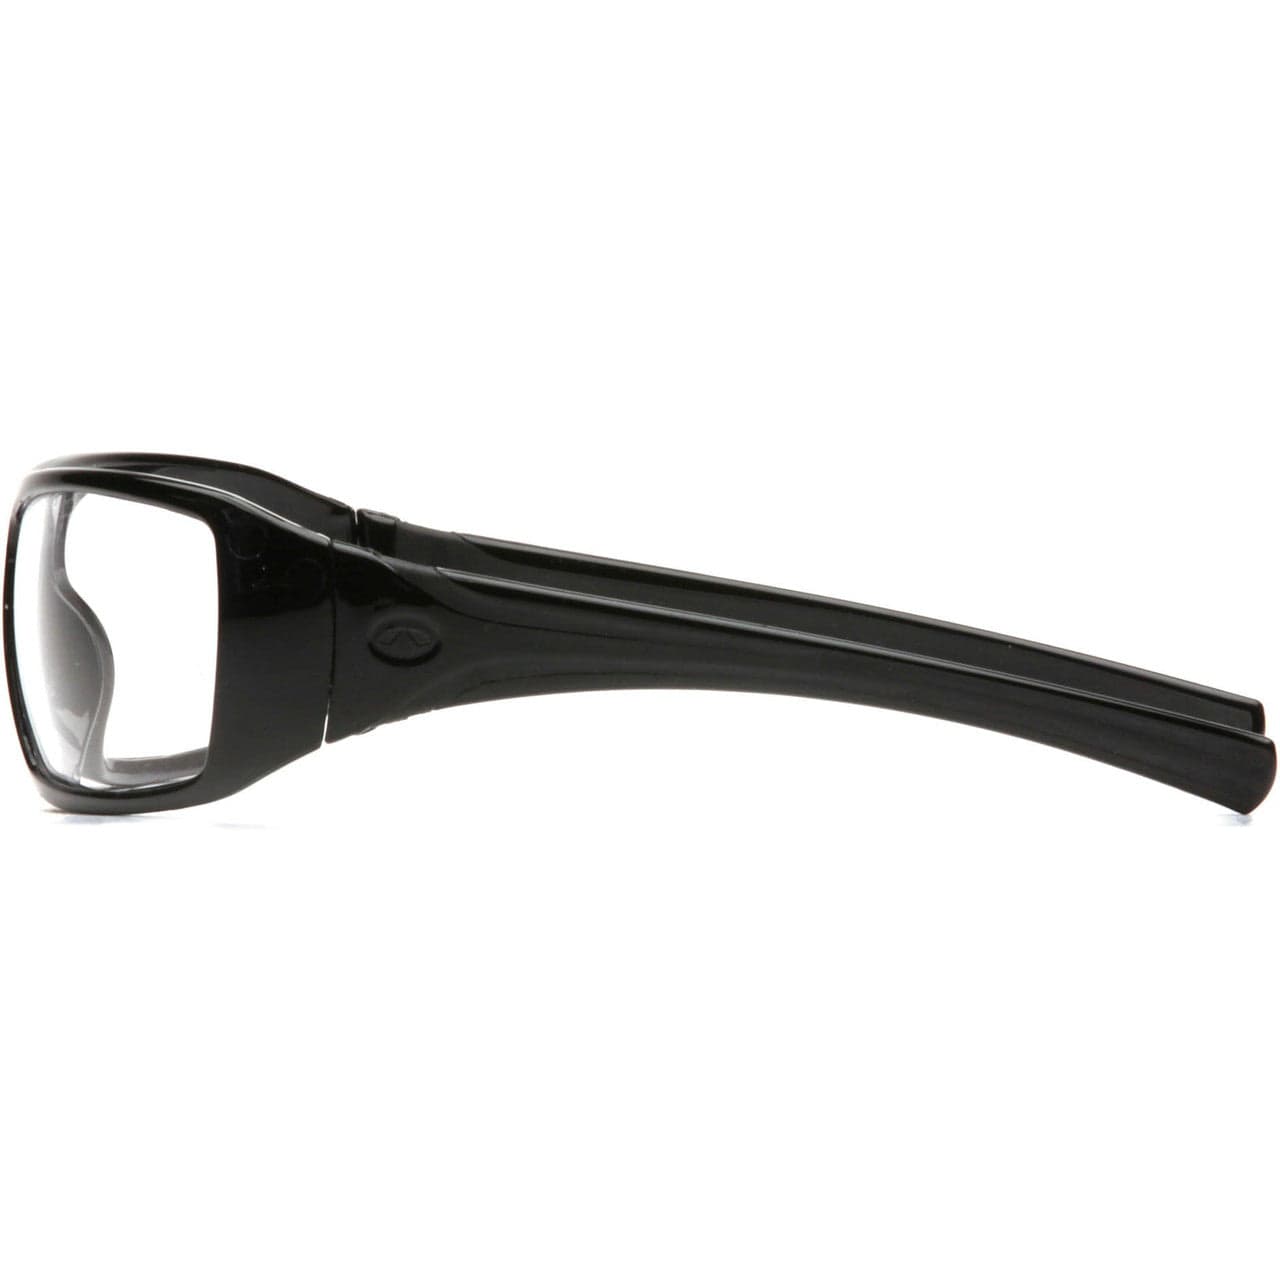 Pyramex Goliath Safety Glasses Black Frame with Clear Lens